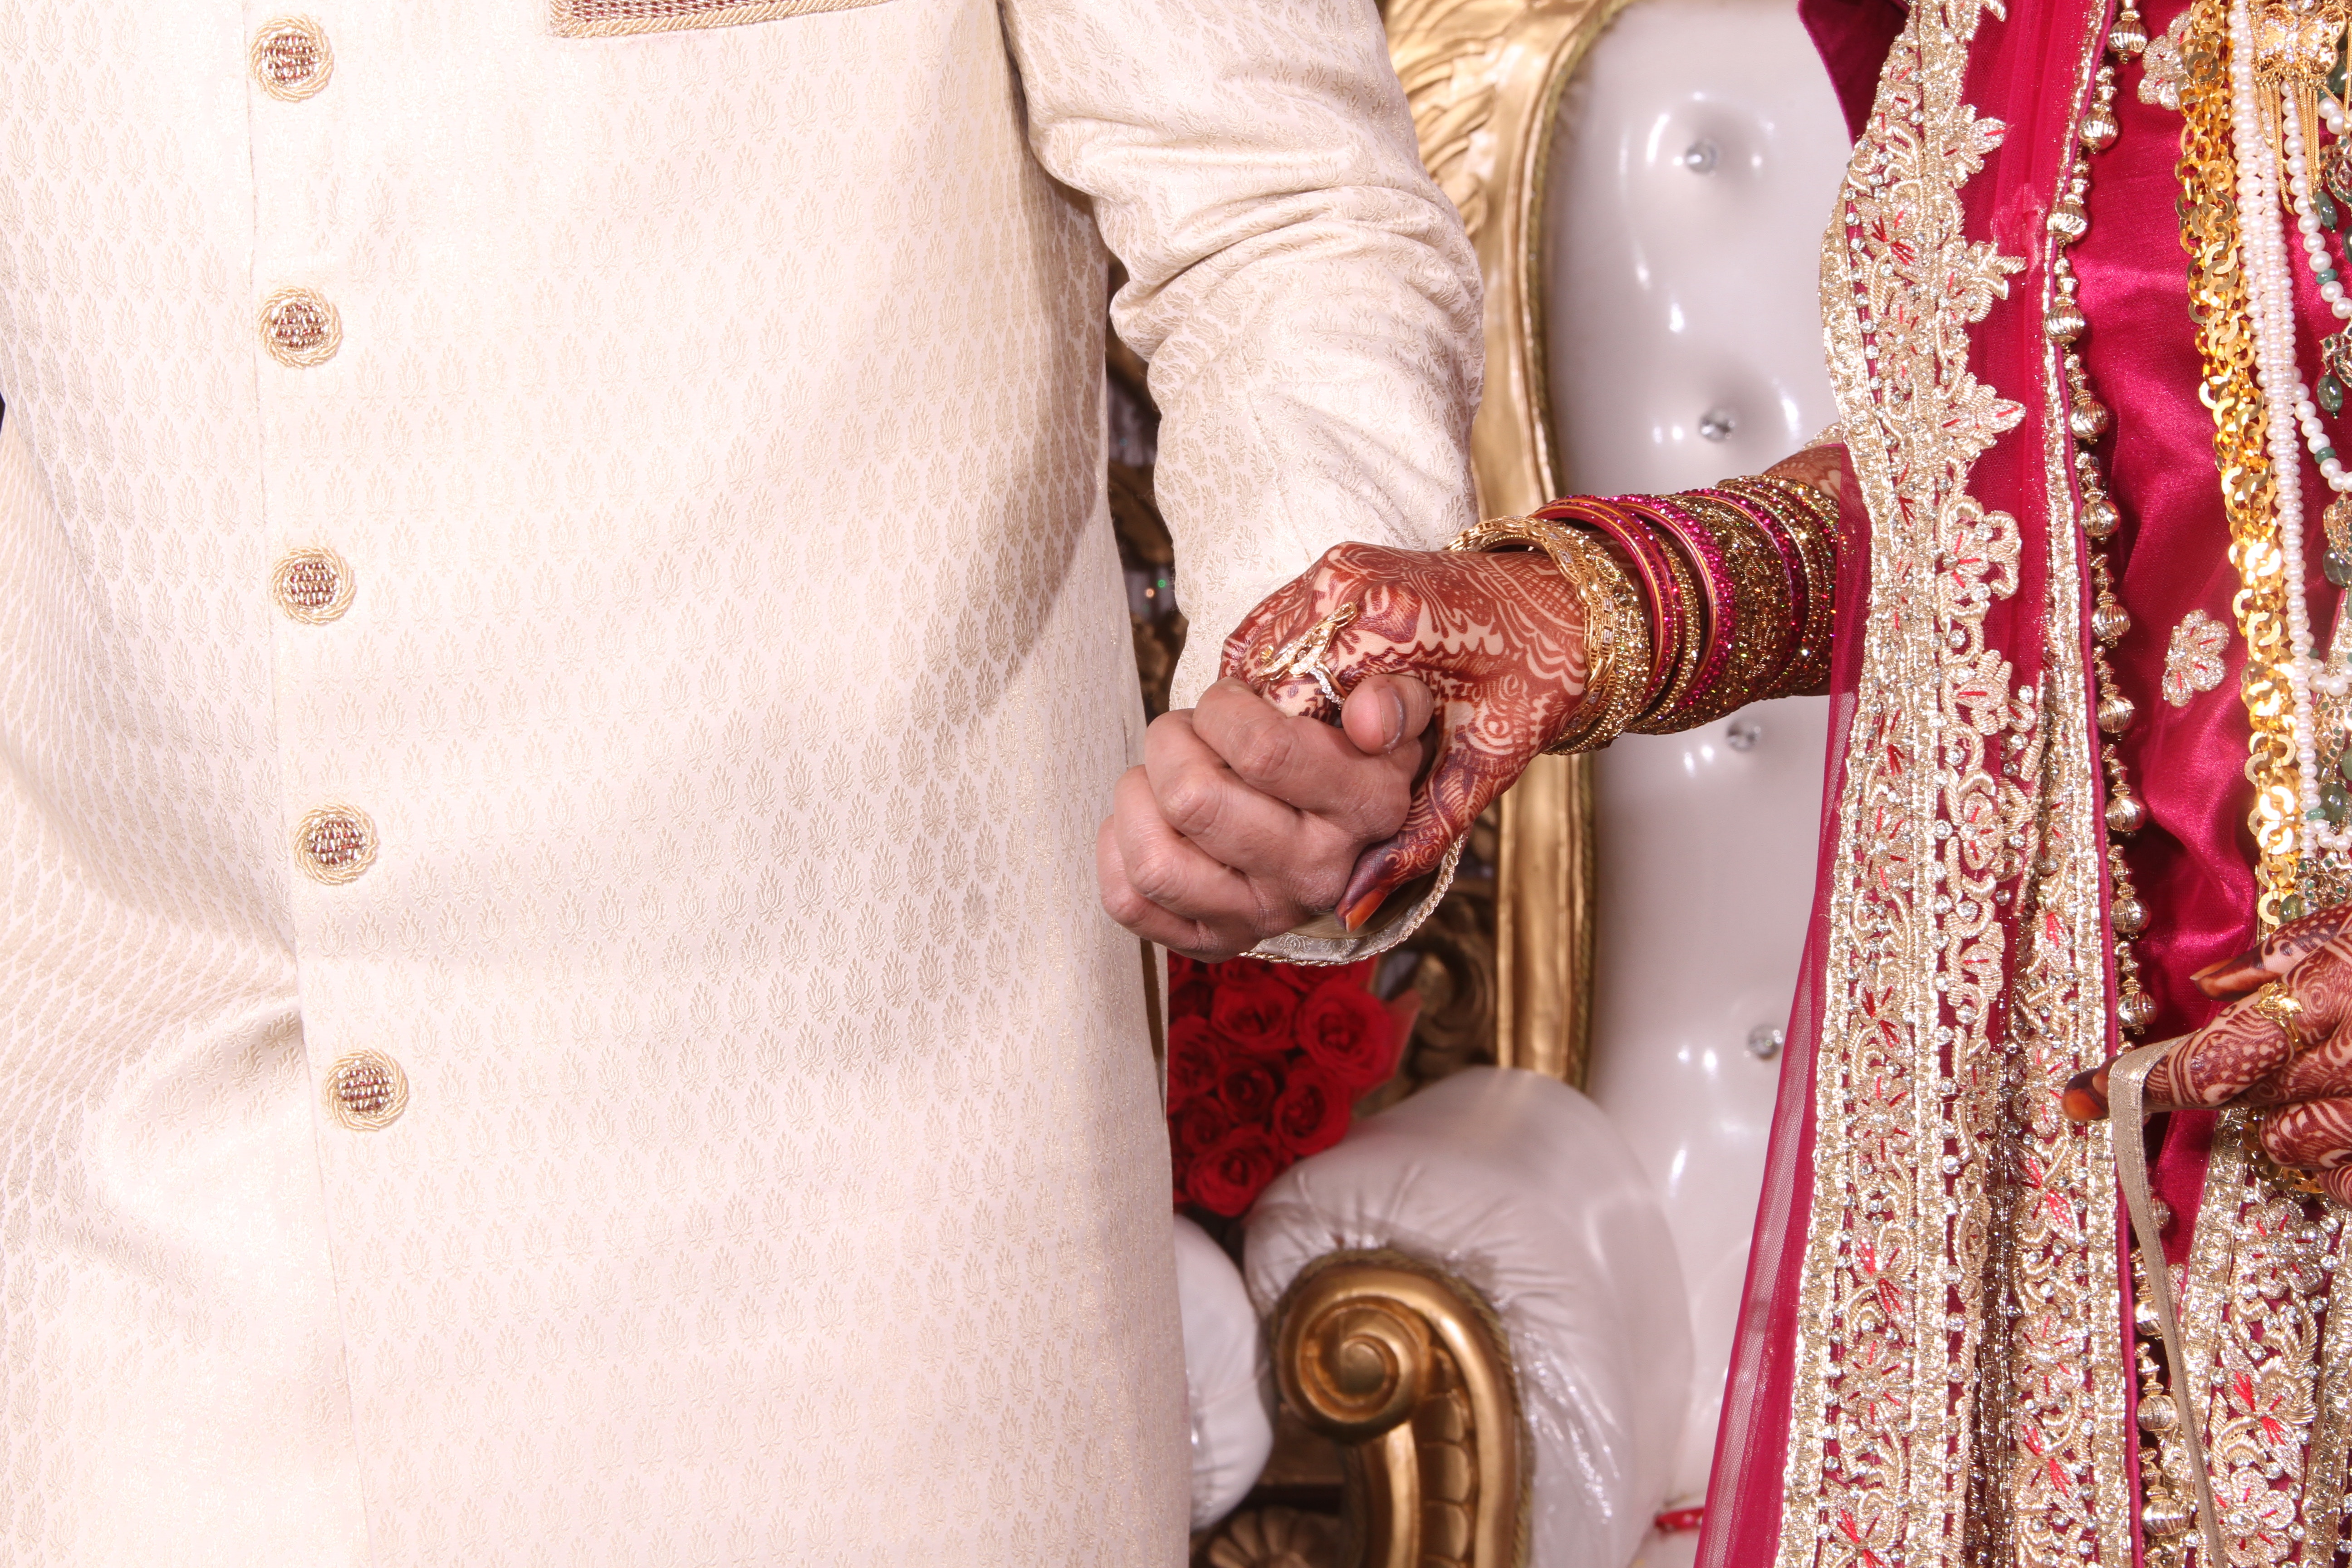 Trusted Matrimony In Dindigul for Brides and Grooms